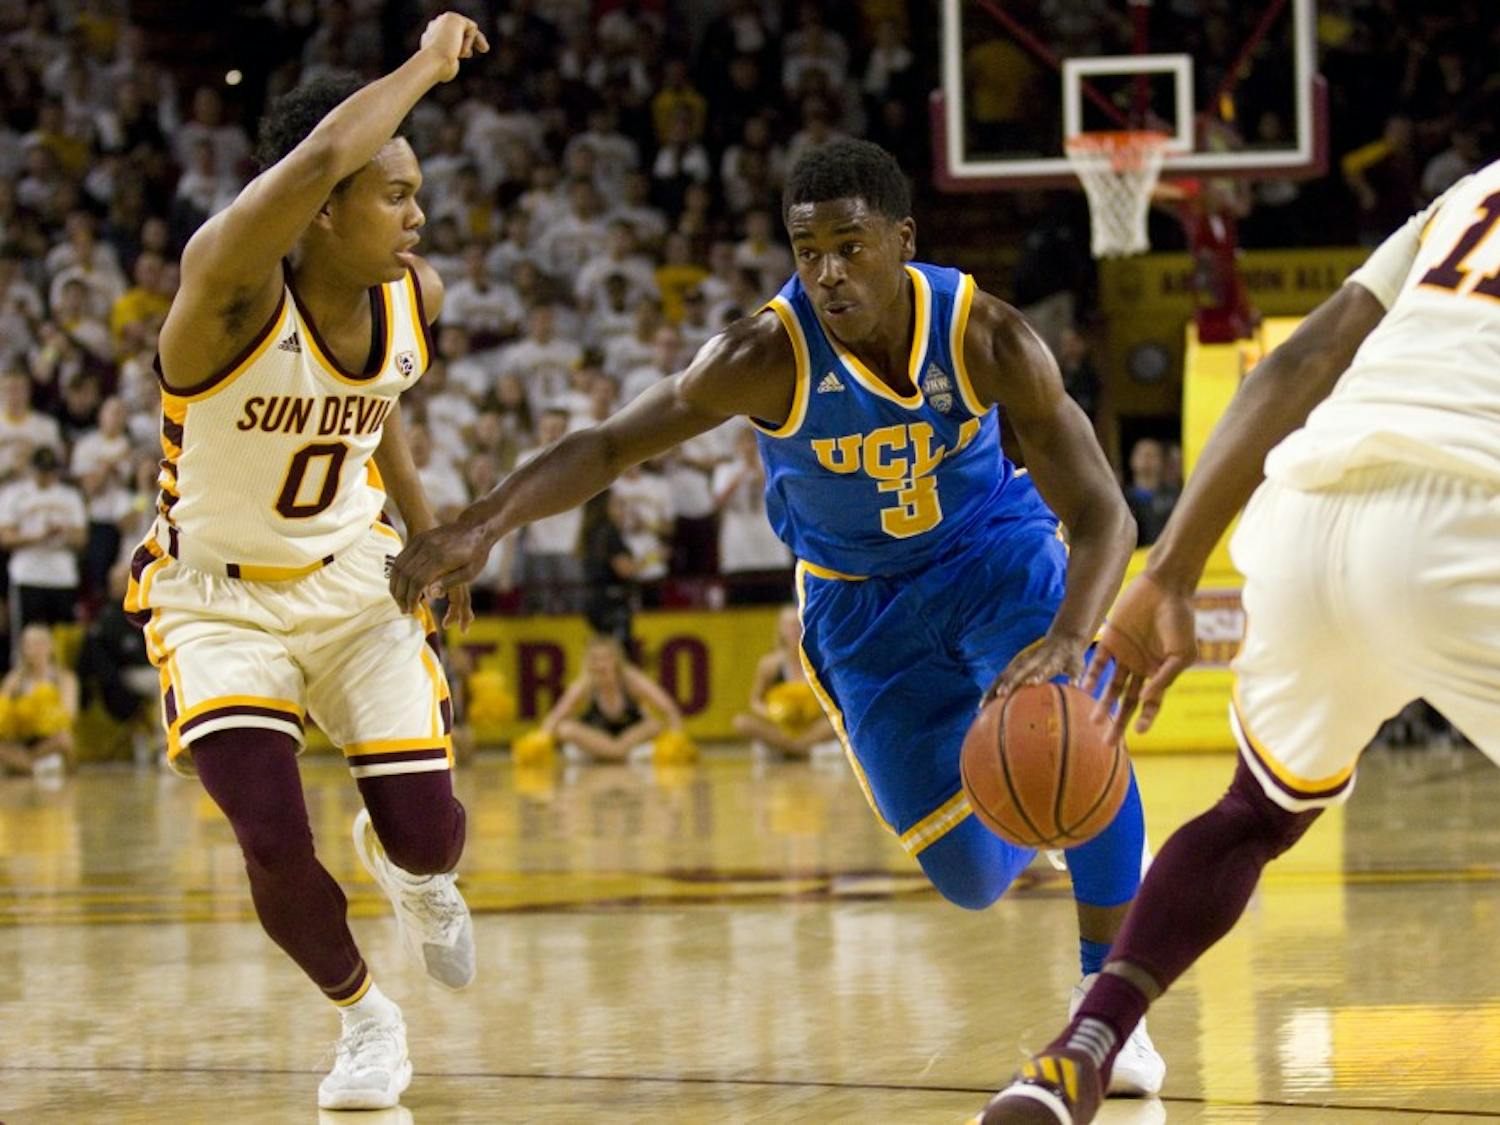 UCLA sophomore guard Aaron Holiday (3) drives towards the basket with ASU junior guard Tra Holder (0) guarding during a men's basketball game versus the Arizona State Sun Devils in Wells Fargo Arena in Tempe, Arizona on Thursday, Feb. 23, 2017. ASU lost the game 87-75. (Josh Orcutt/State Press) 